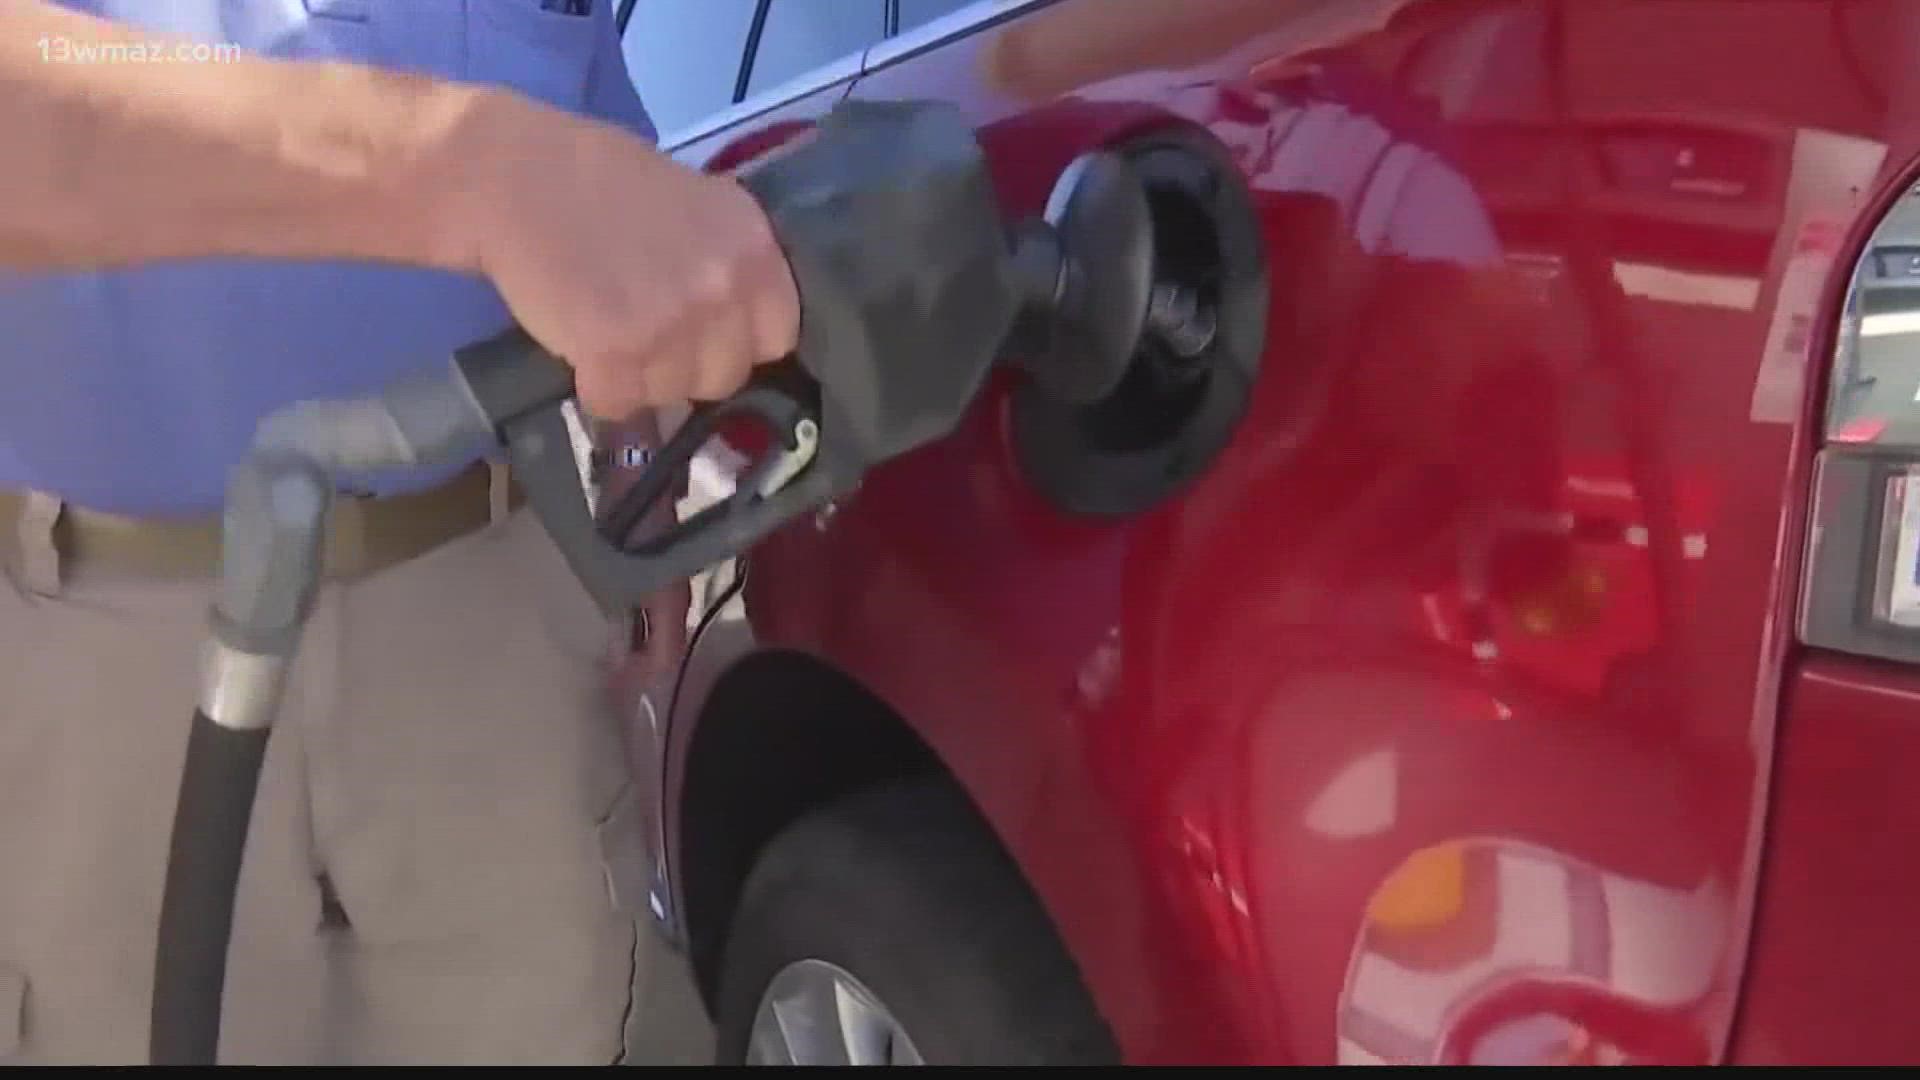 We can Verify, what you're seeing with the rise in gas prices is not considered price gouging.